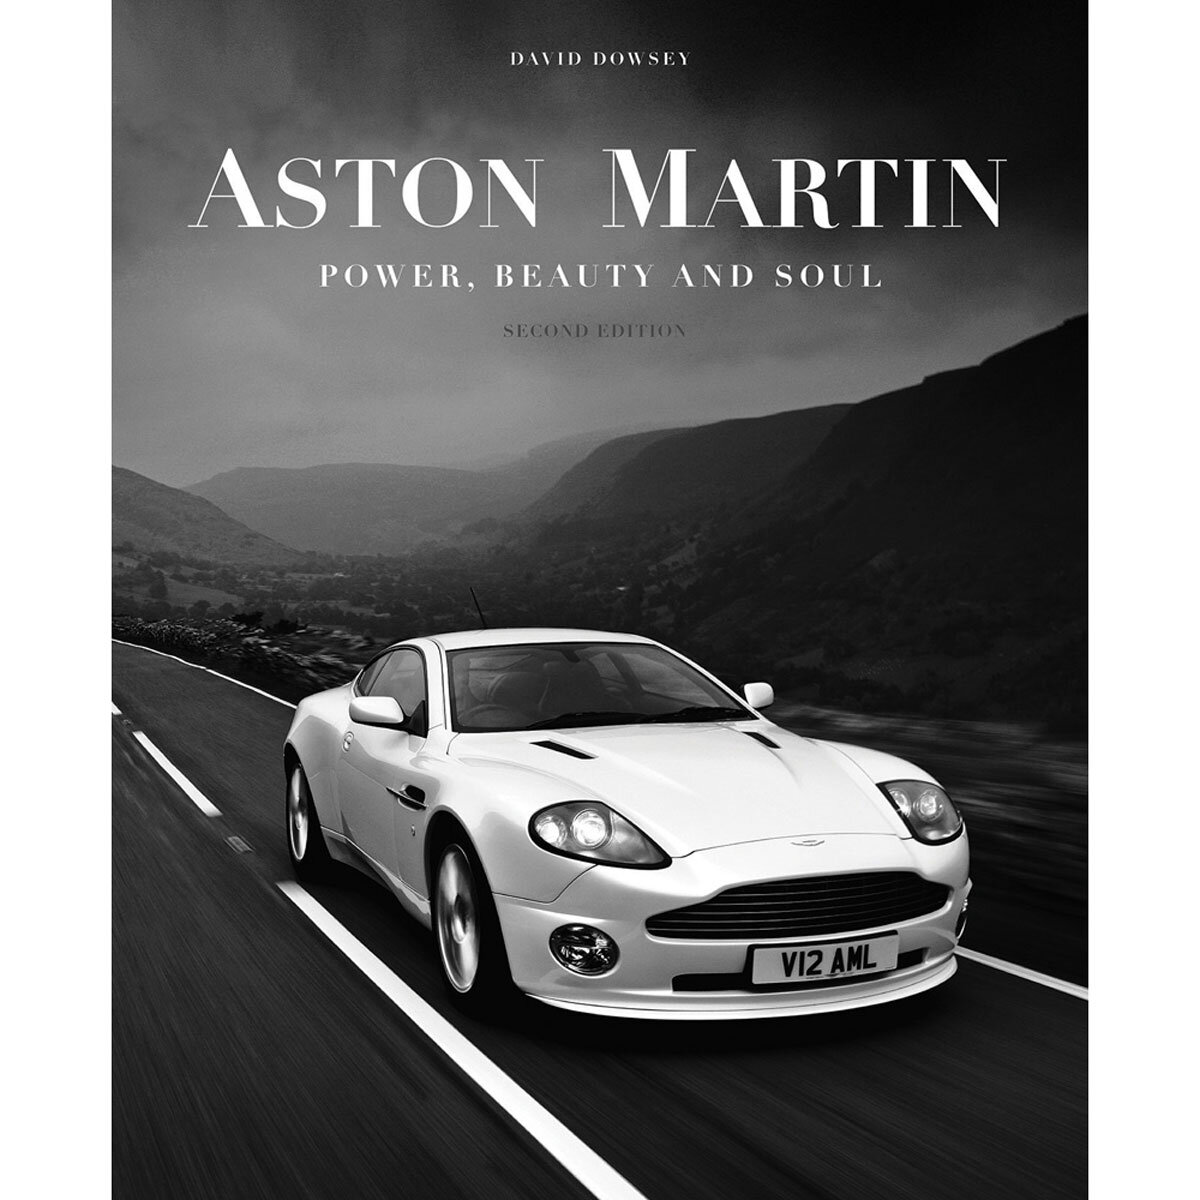 Title Page of Aston Martin book depicting an Aston Martin